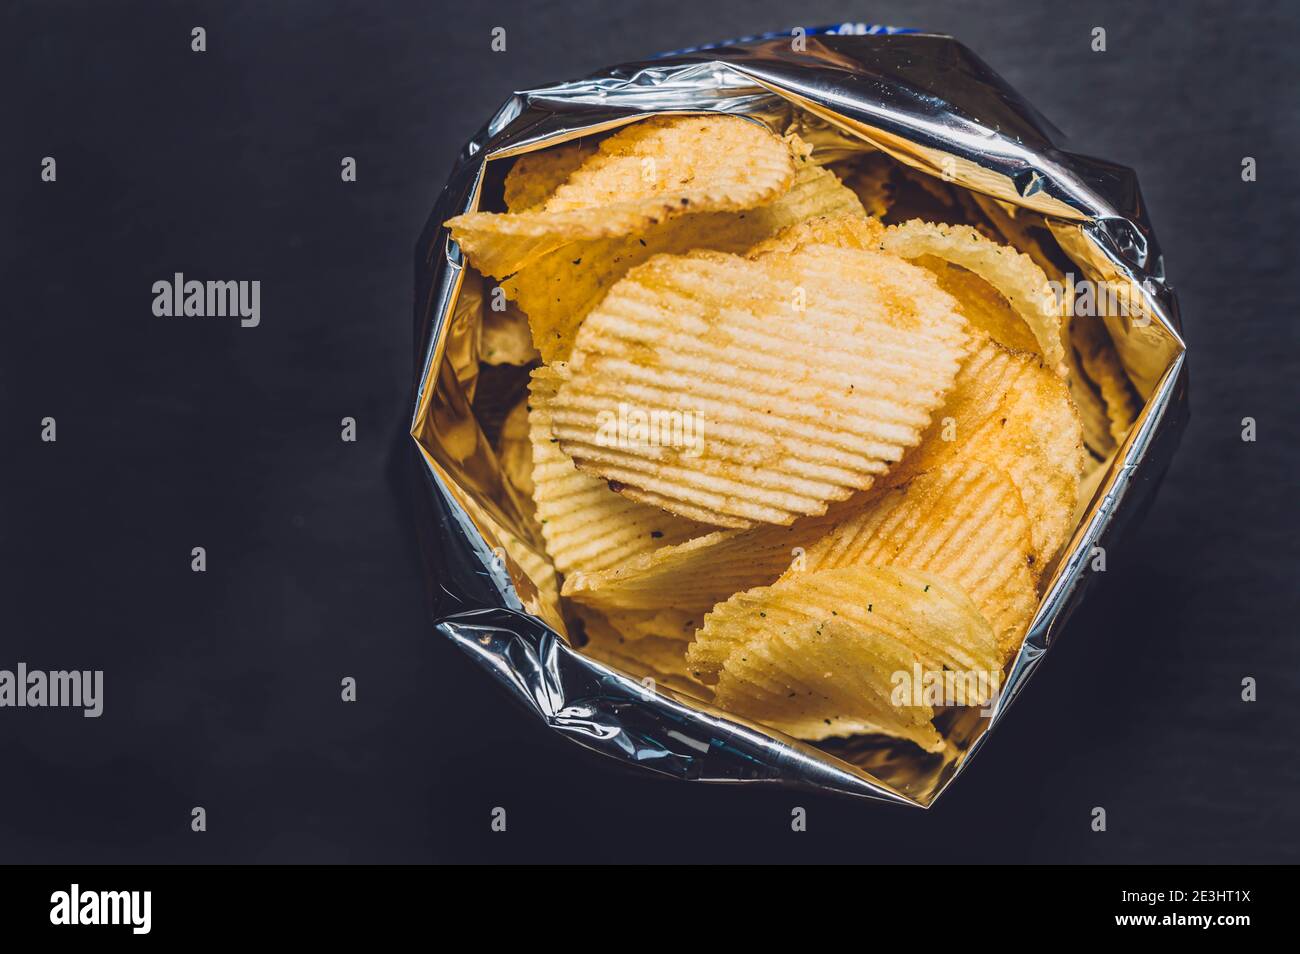 Close up top view of bag of chips or crisps isolated on black background.  Potato chips snack in bag ready to eat. Fast food or junk food Stock Photo  - Alamy